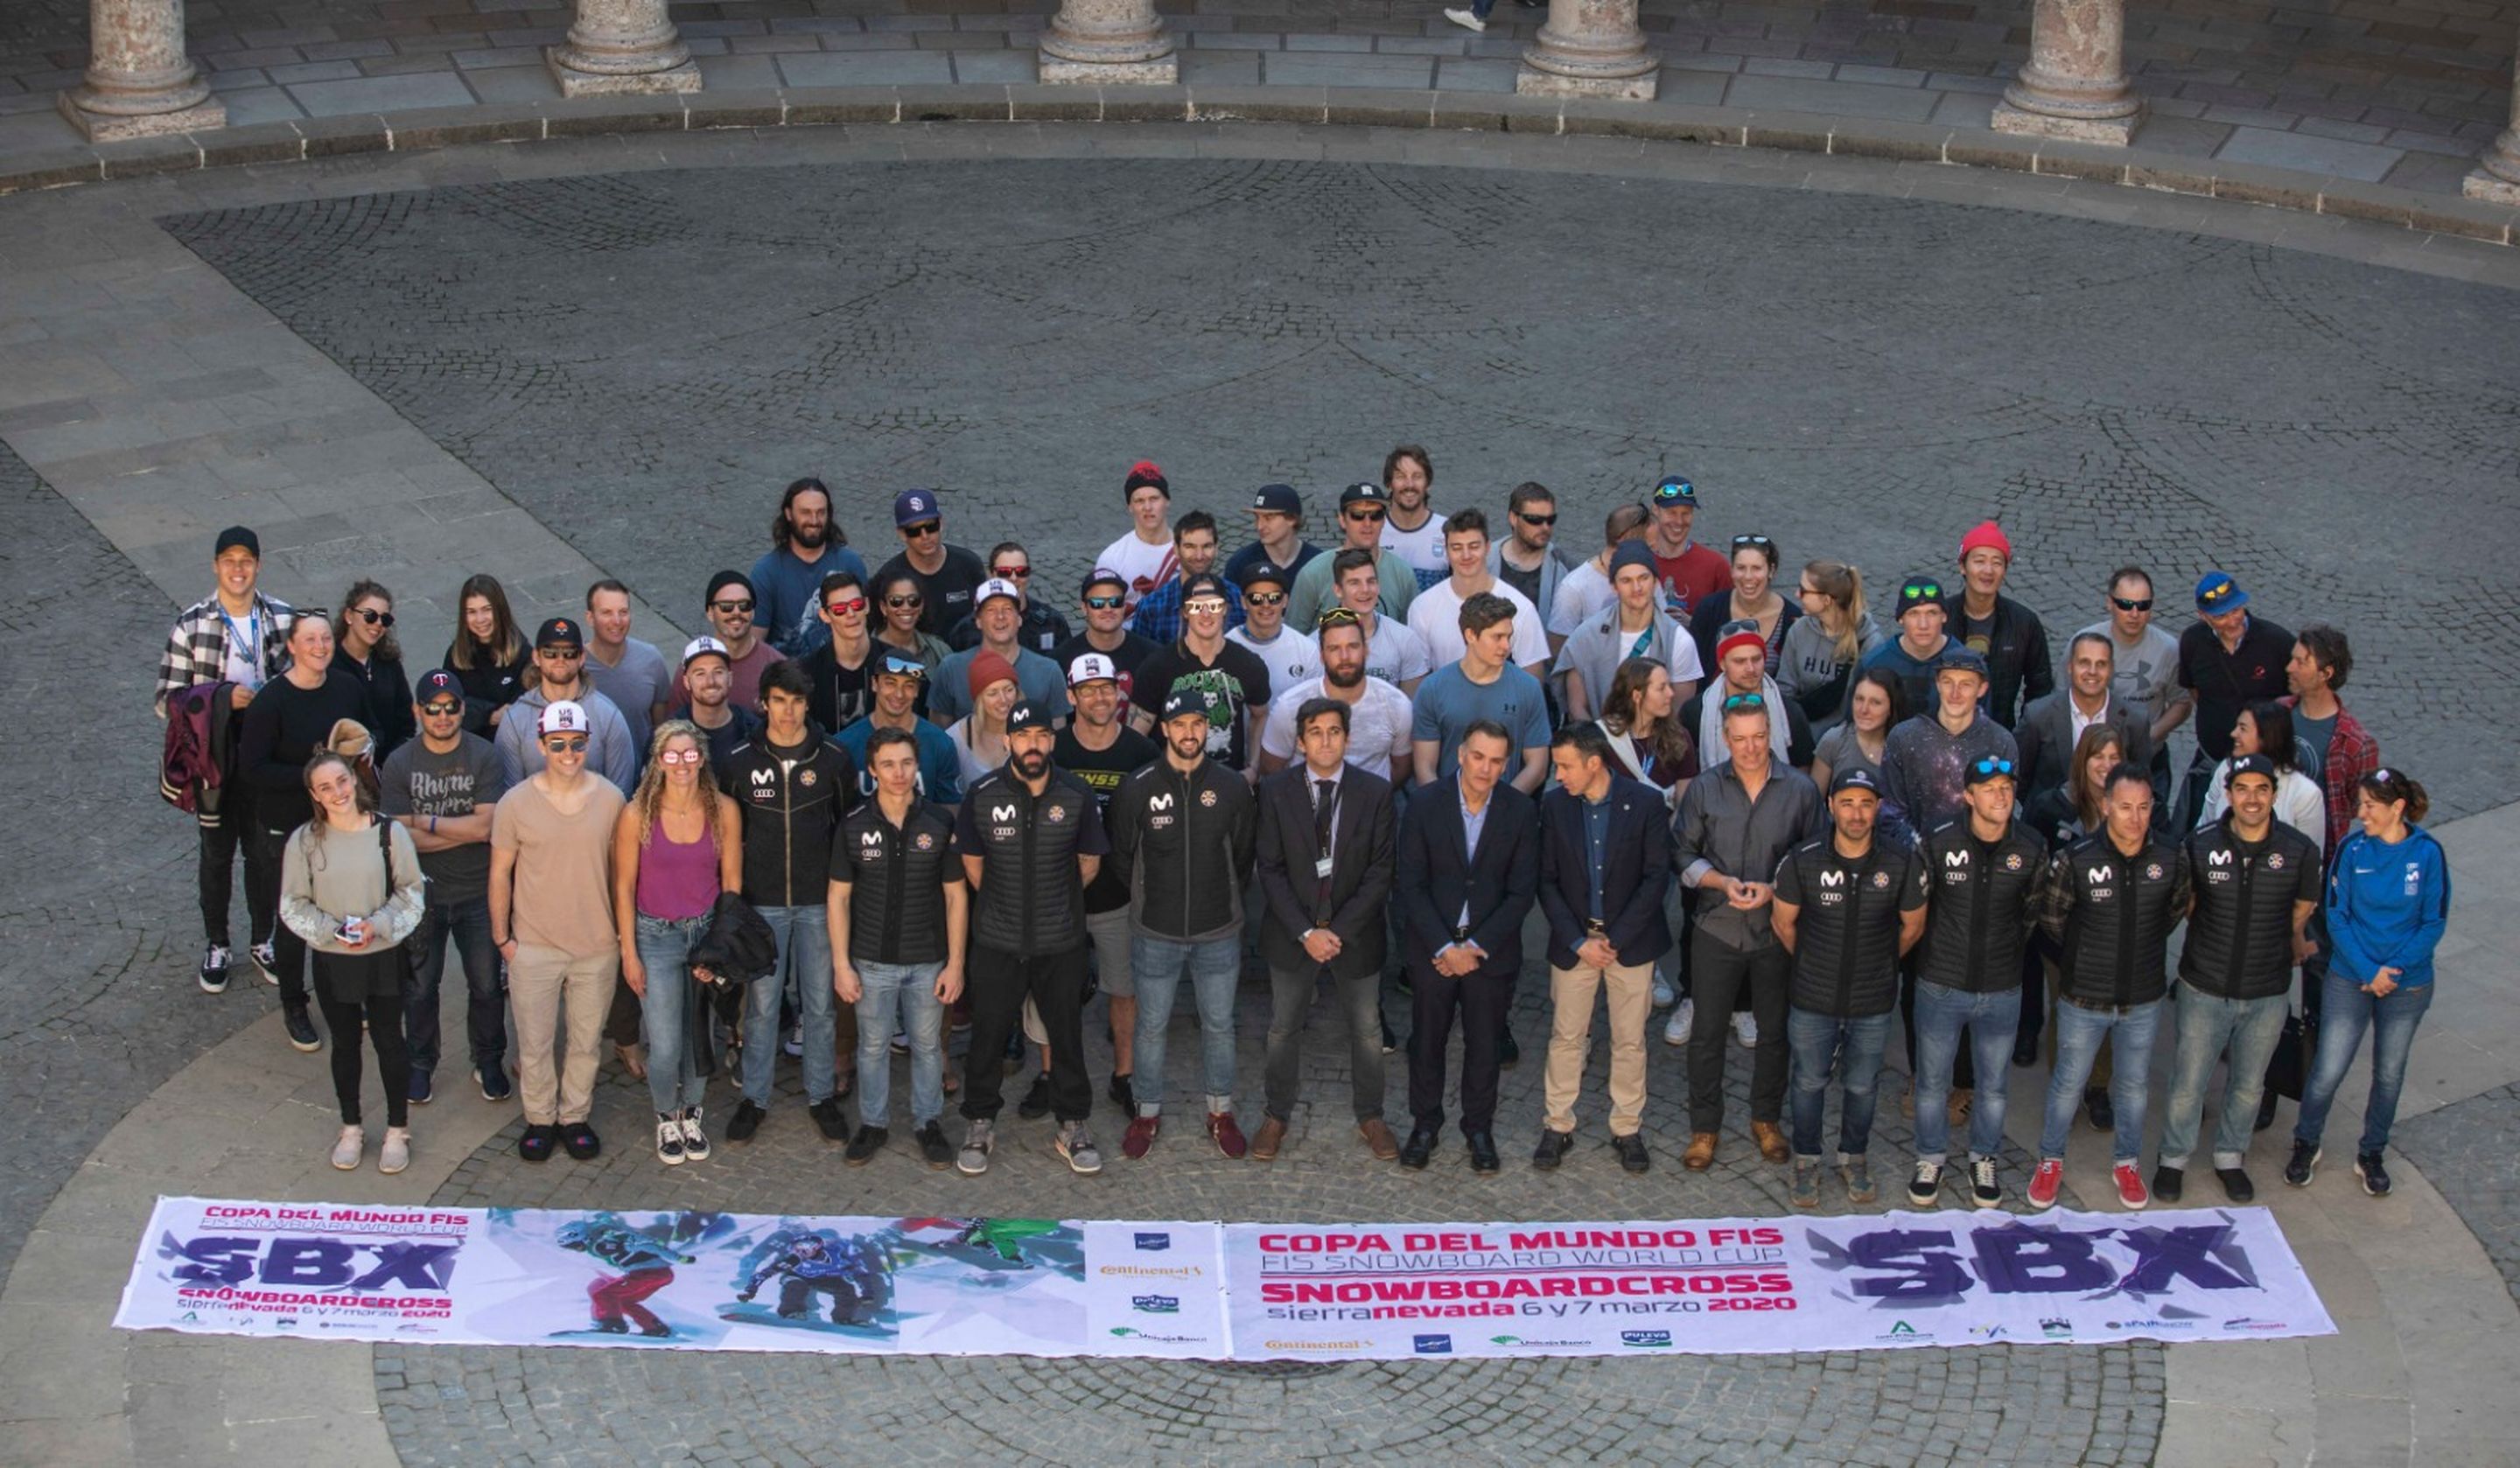 A group photo of the SBX athletes was taken at the Alhambra to promote the event